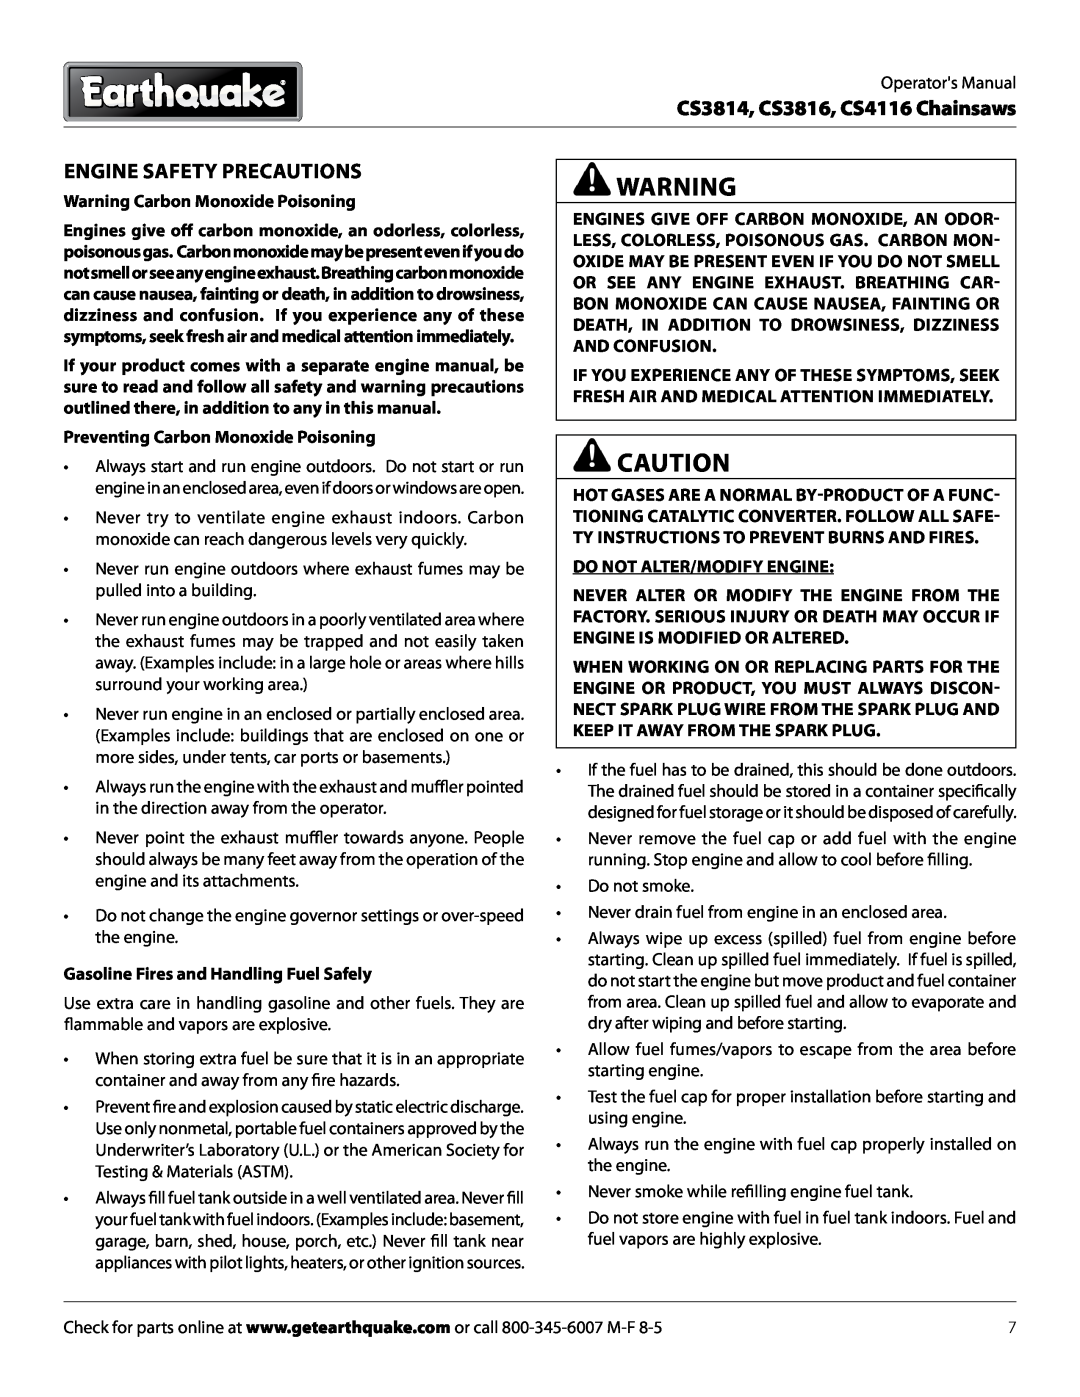 EarthQuake CS4116 manual Engine Safety Precautions, Warning Carbon Monoxide Poisoning, Preventing Carbon Monoxide Poisoning 